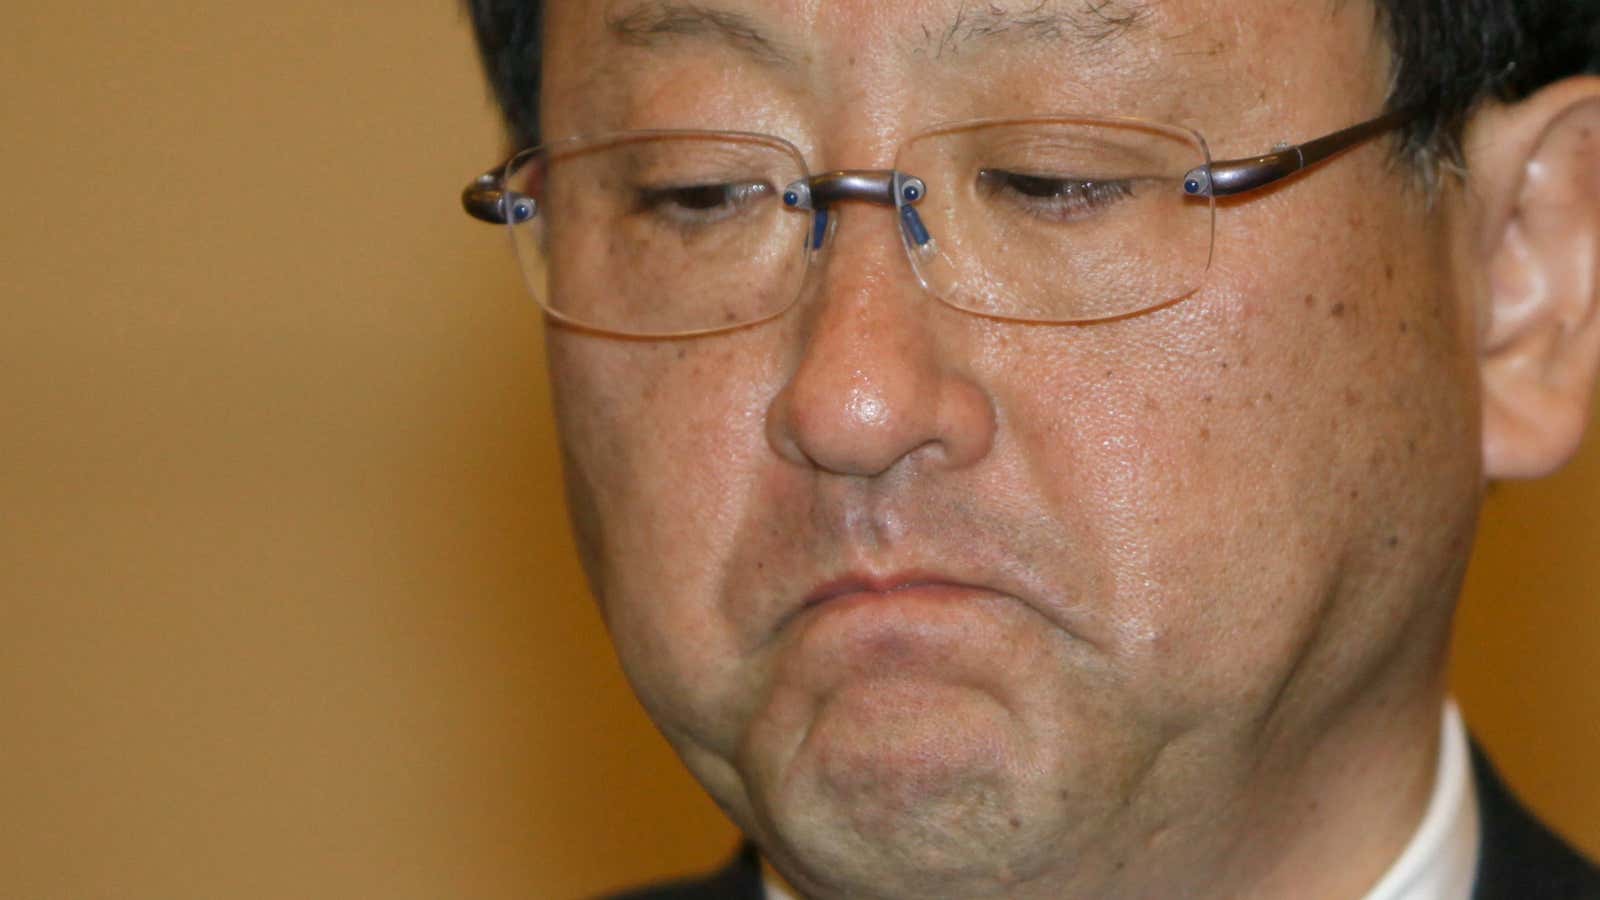 Toyota’s Akio Toyoda has got the quintessential CEO apology face down pat.